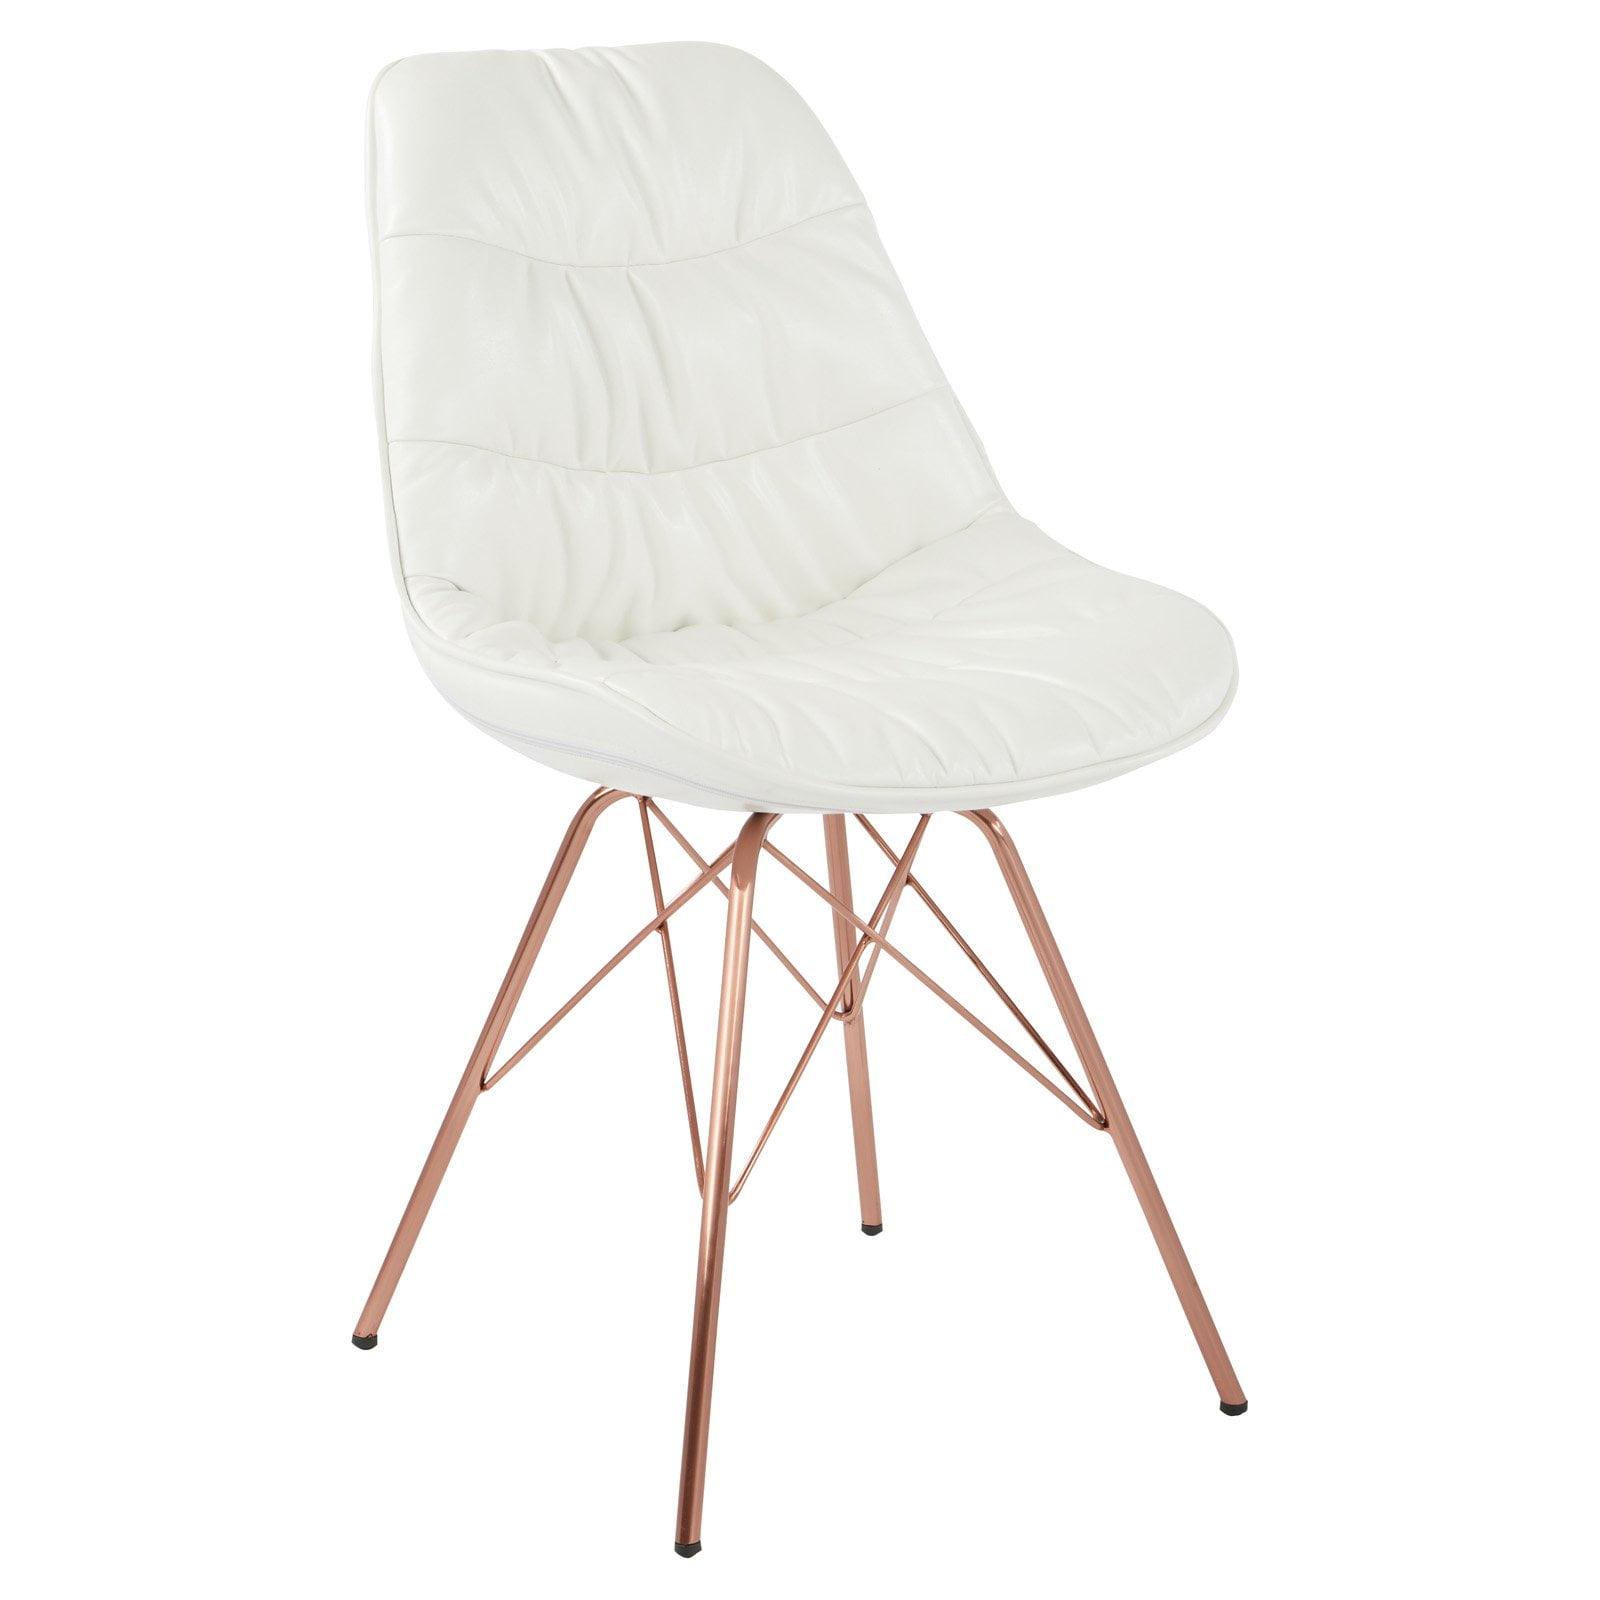 Mid-Century Modern Langdon White Faux Leather Side Chair with Rose Gold Metal Base